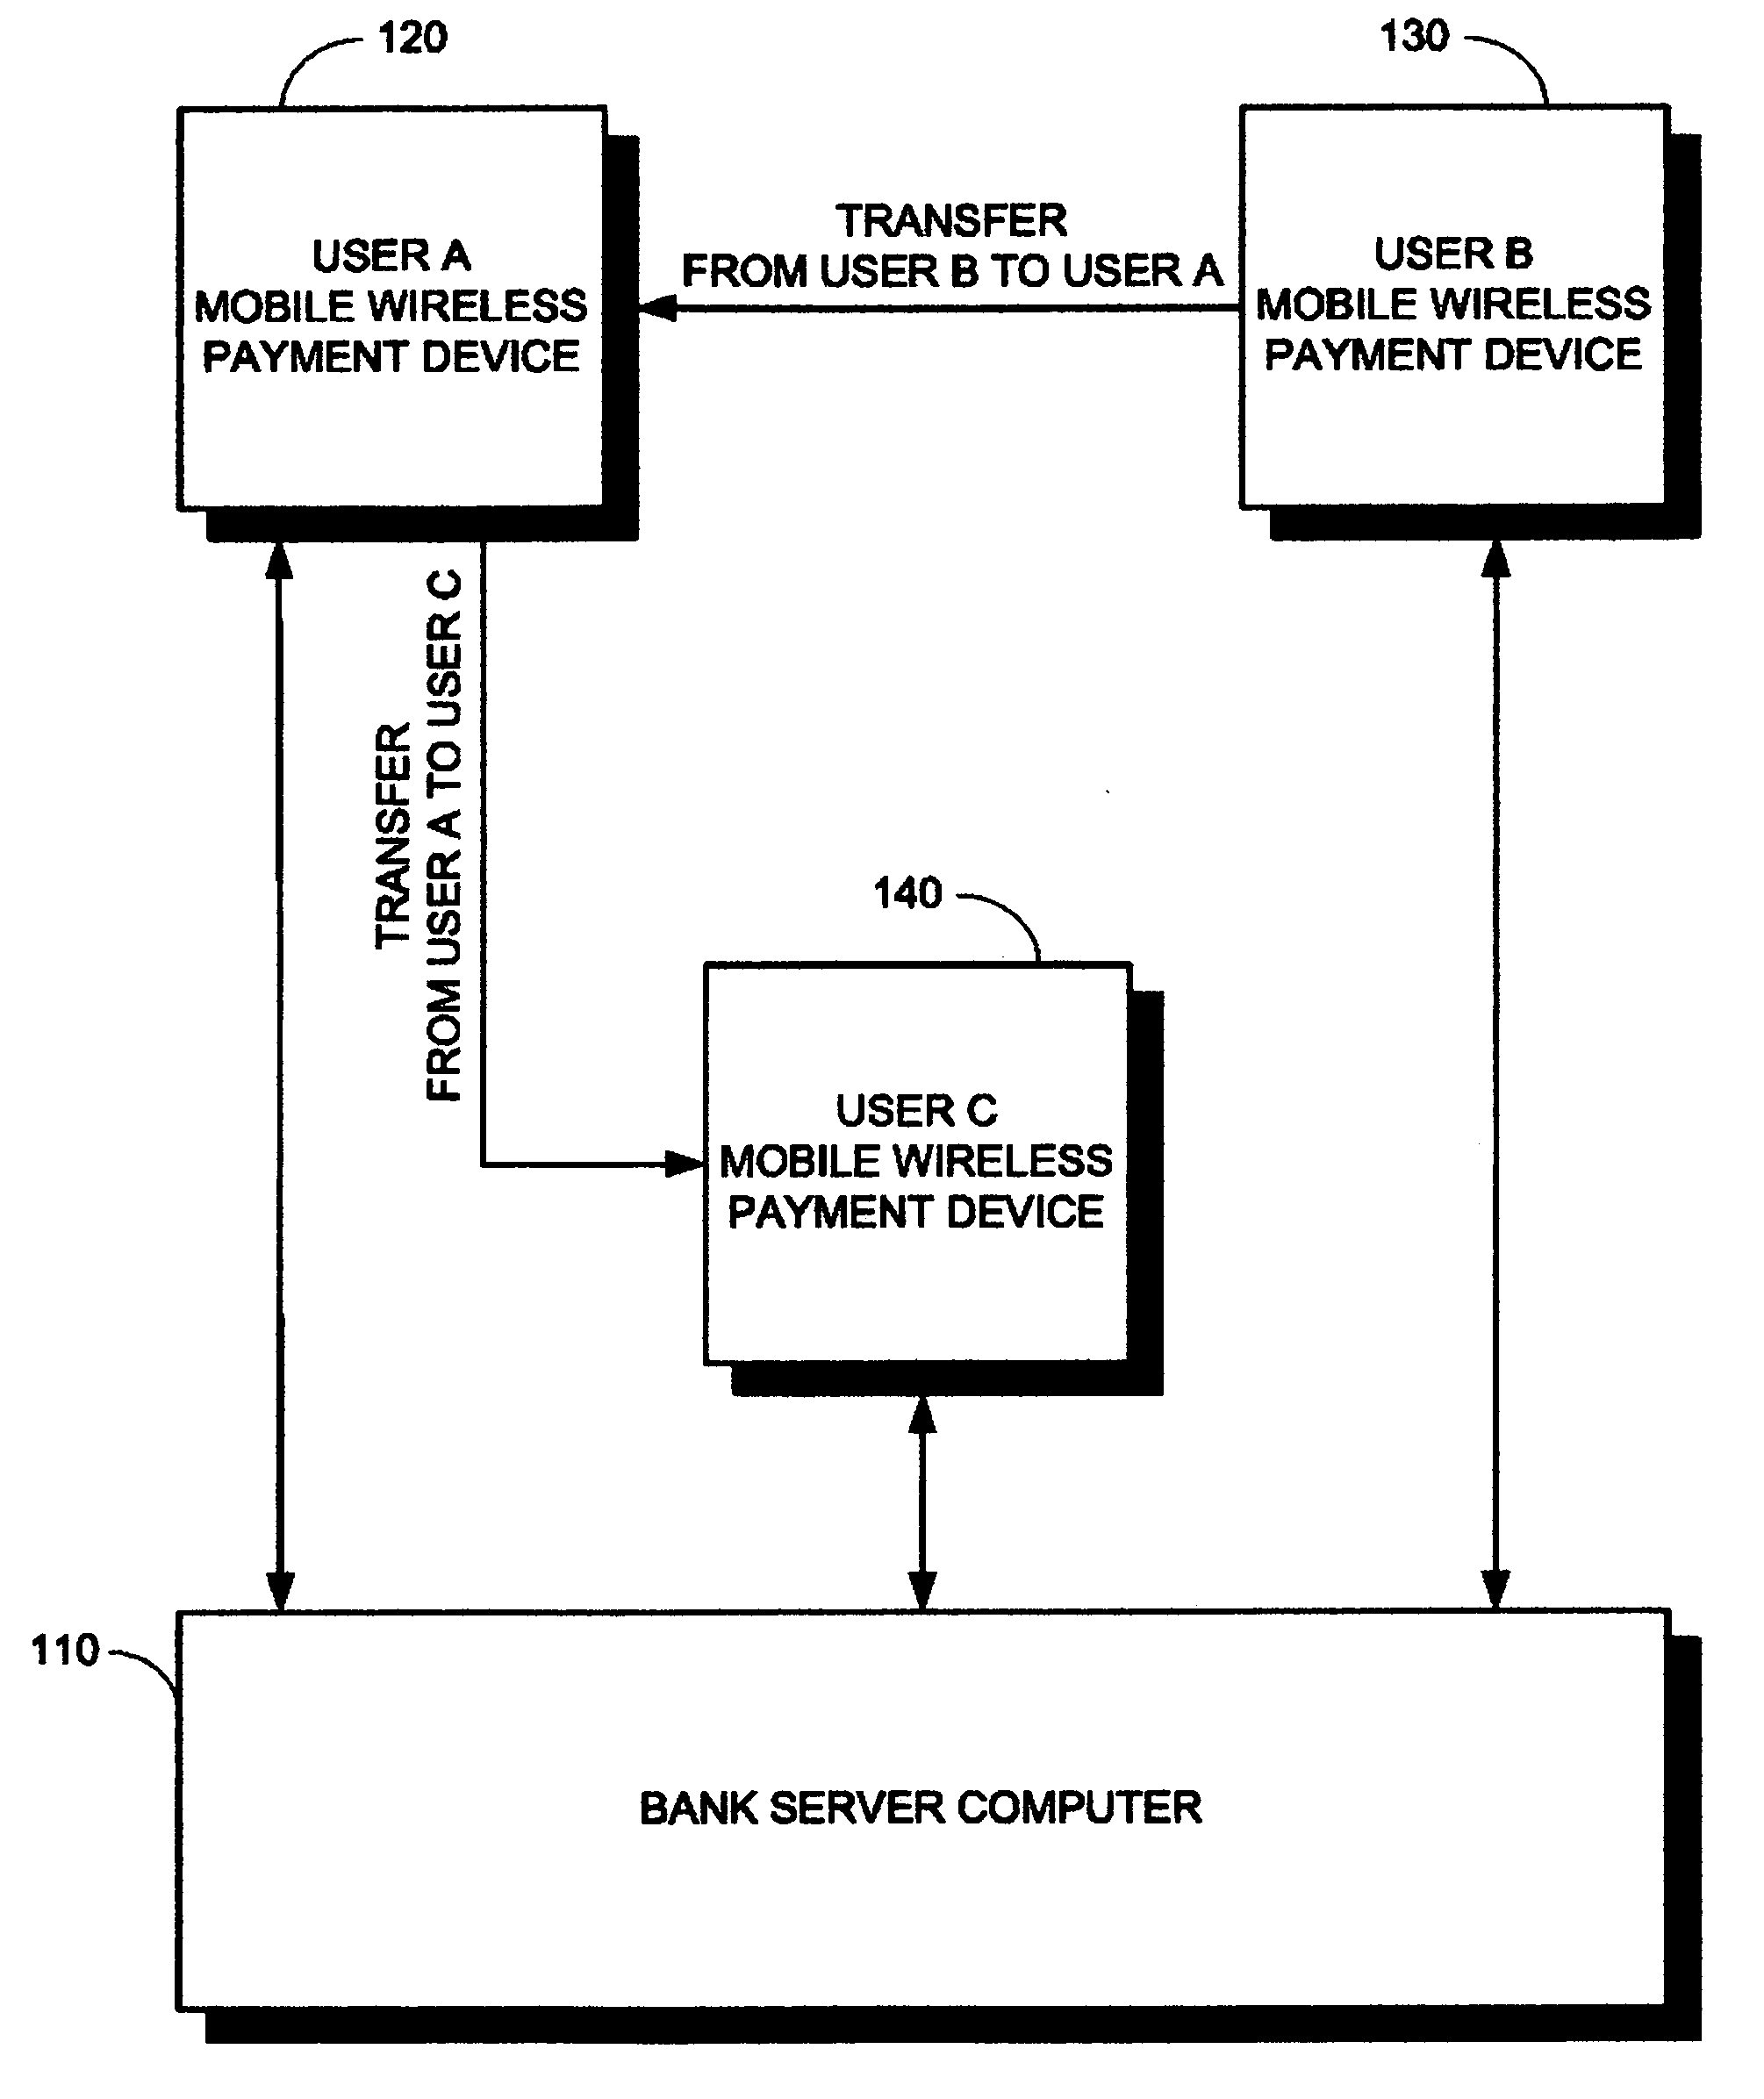 Computerized person-to-person payment system and method without use of currency